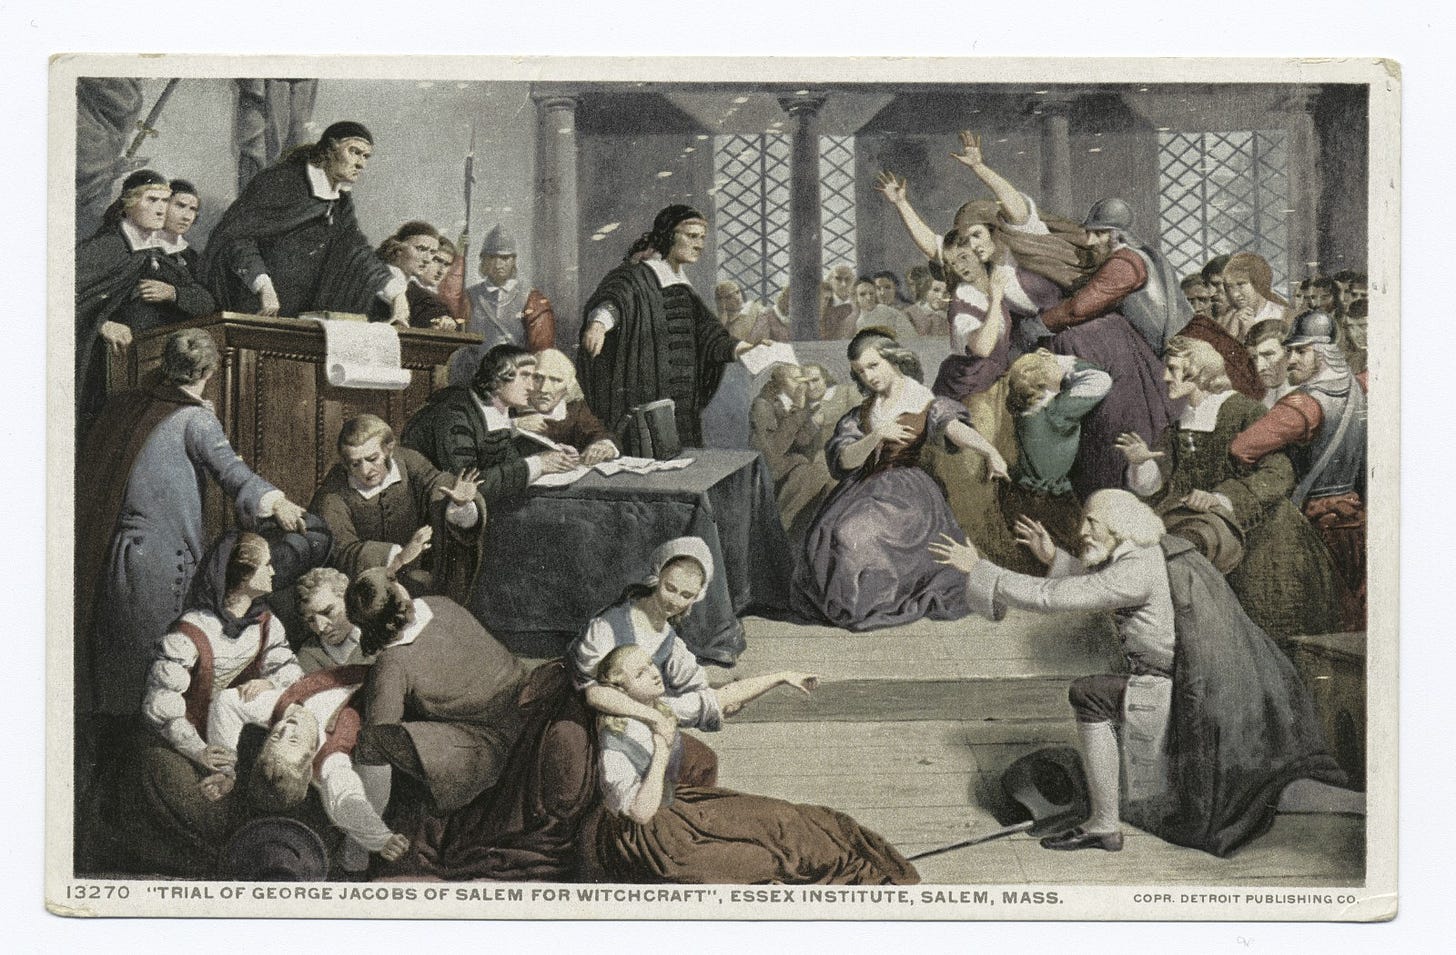 Salem witch trials: Pandemonium in the courtroom as people point and faint